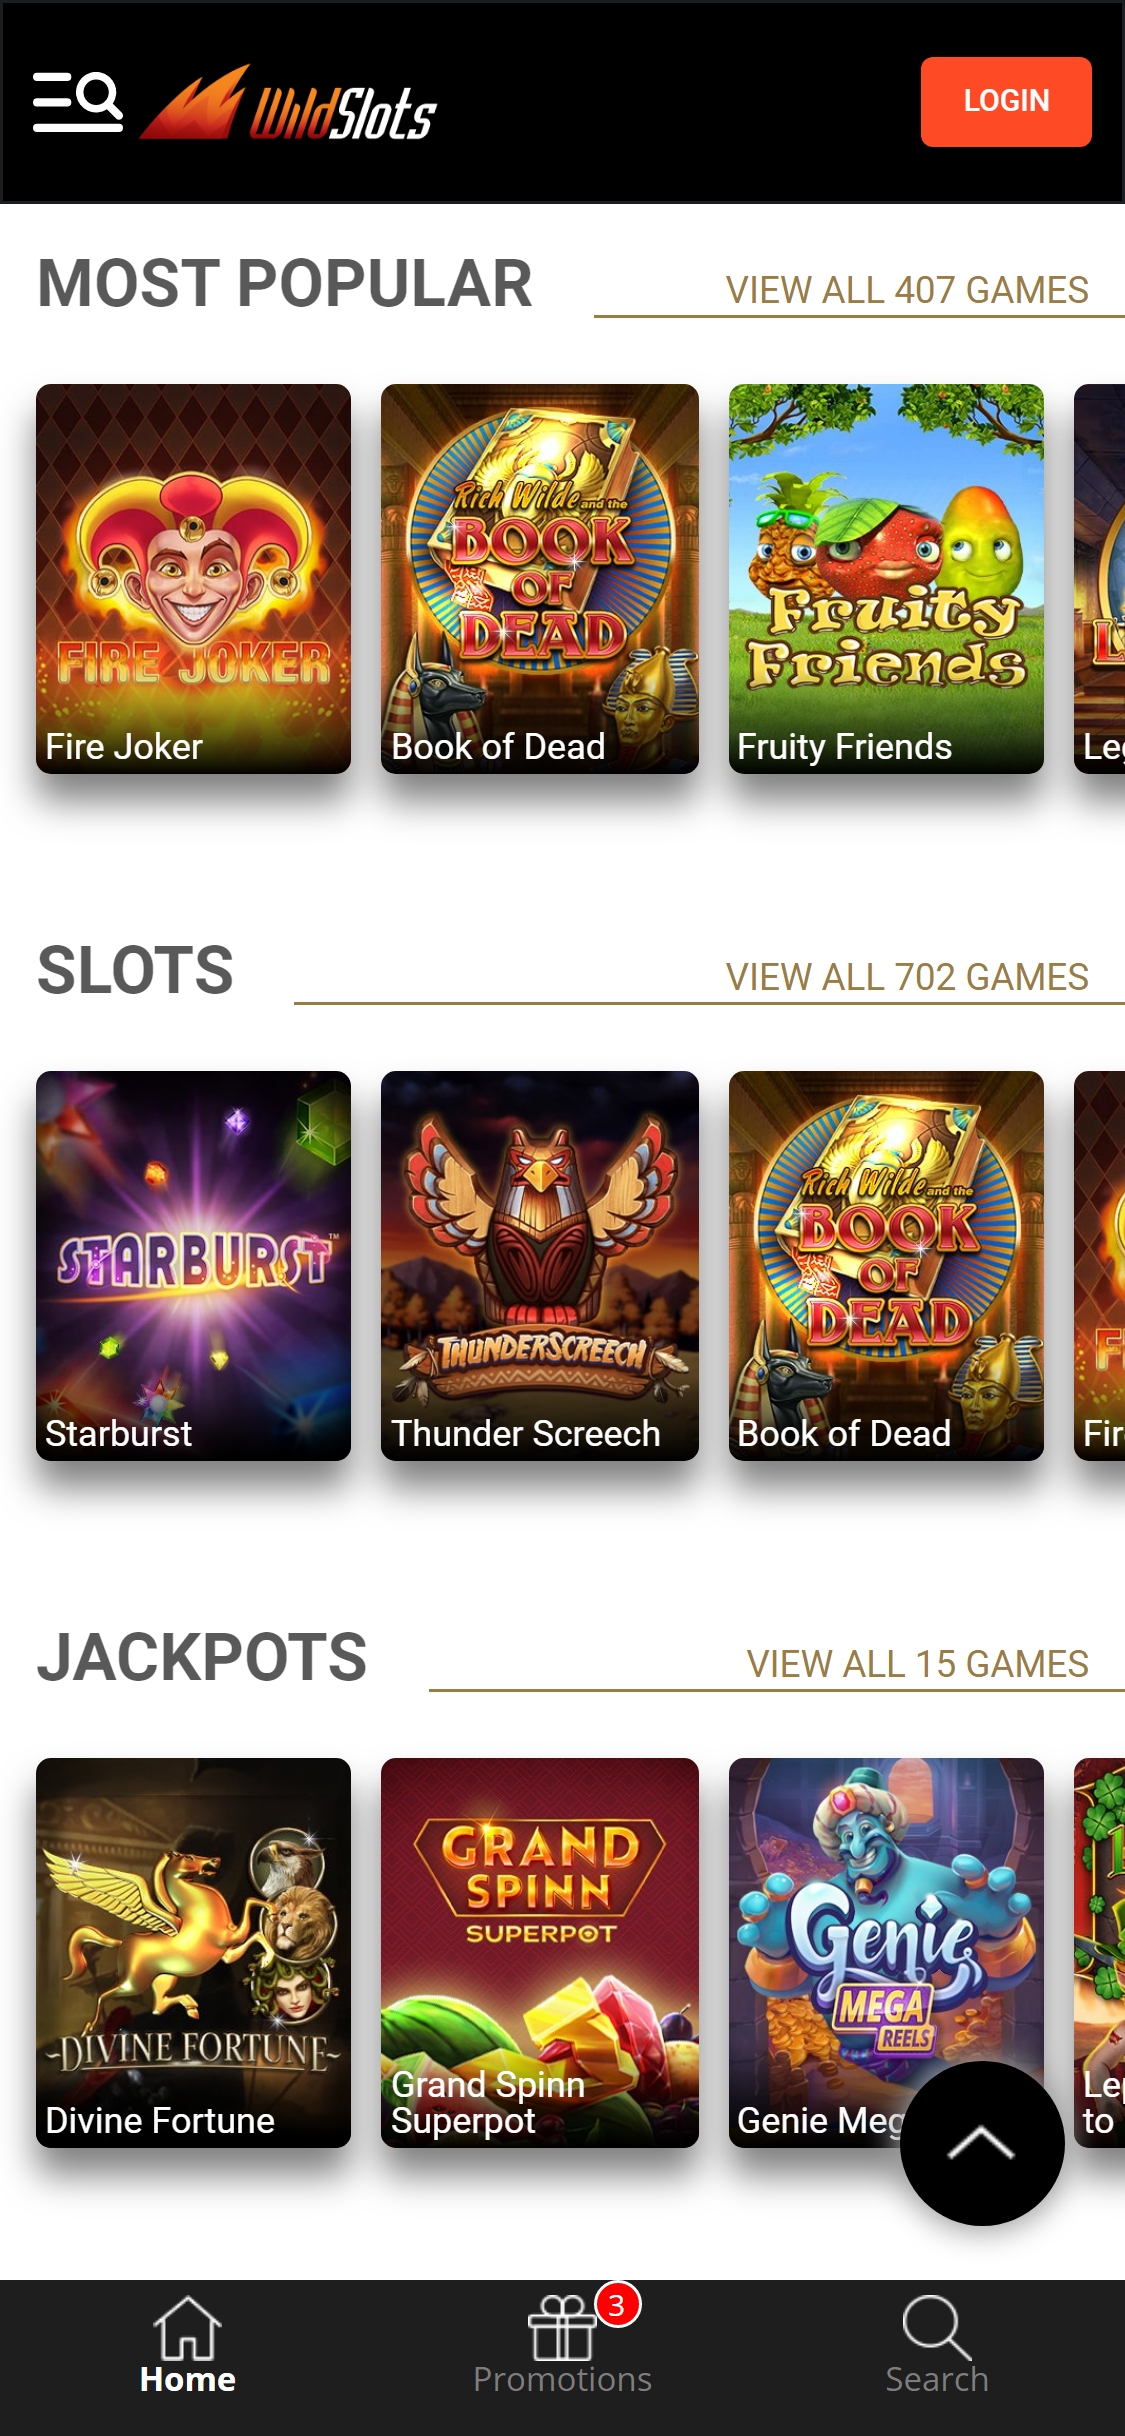 WildSlots Casino Mobile Games Review